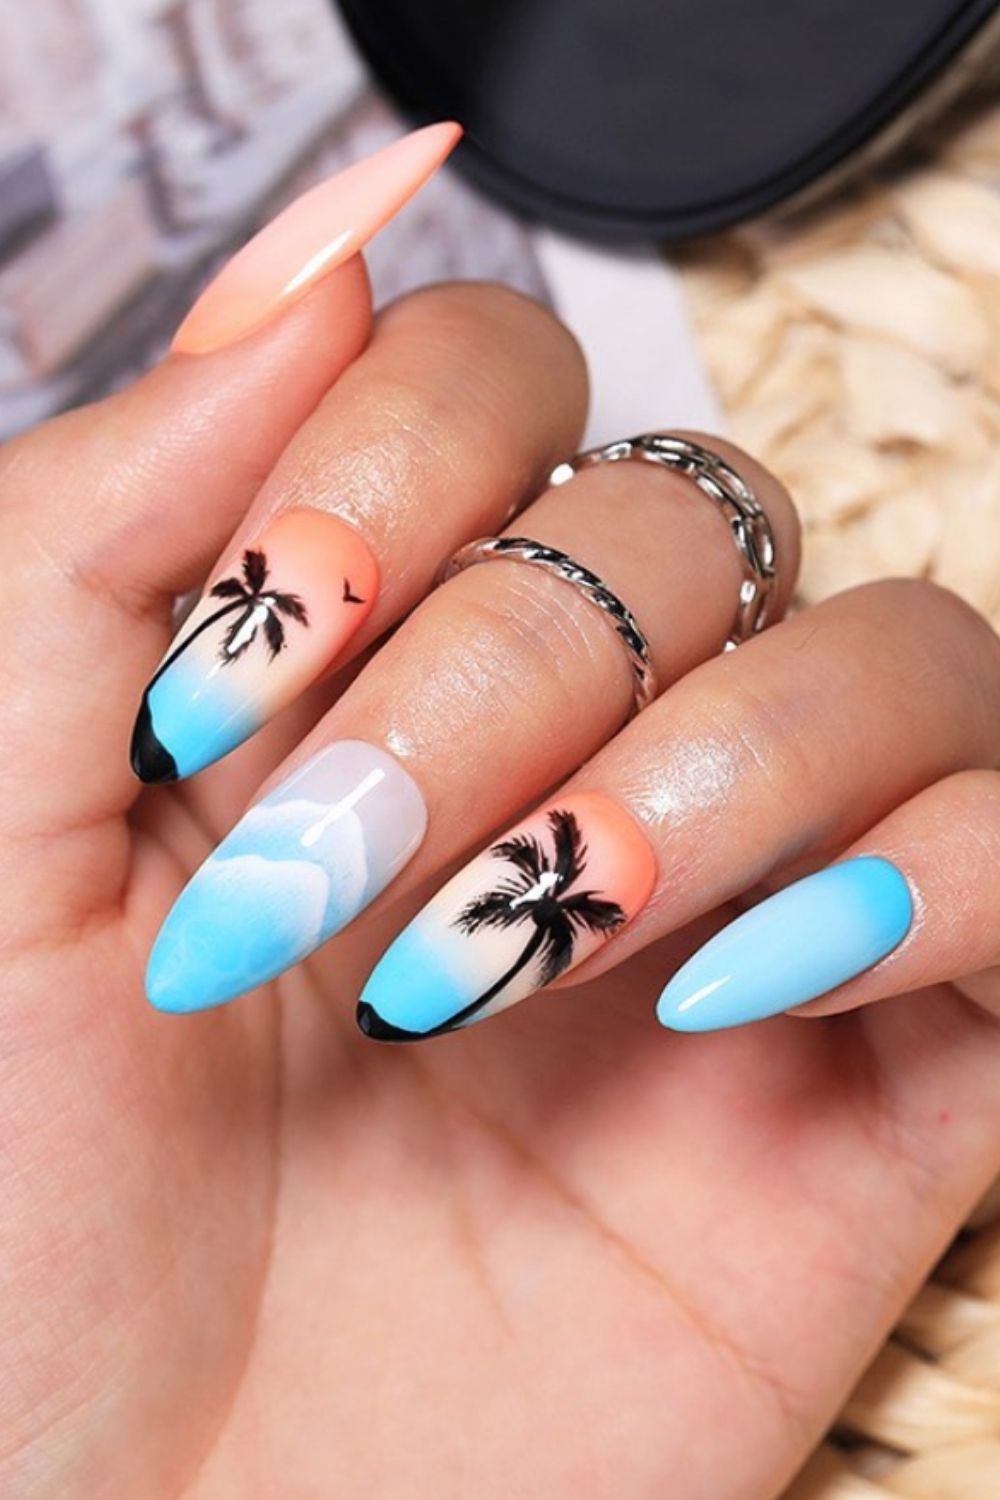 Almond beach nail design with blue sky, white clouds and coconut palm trees